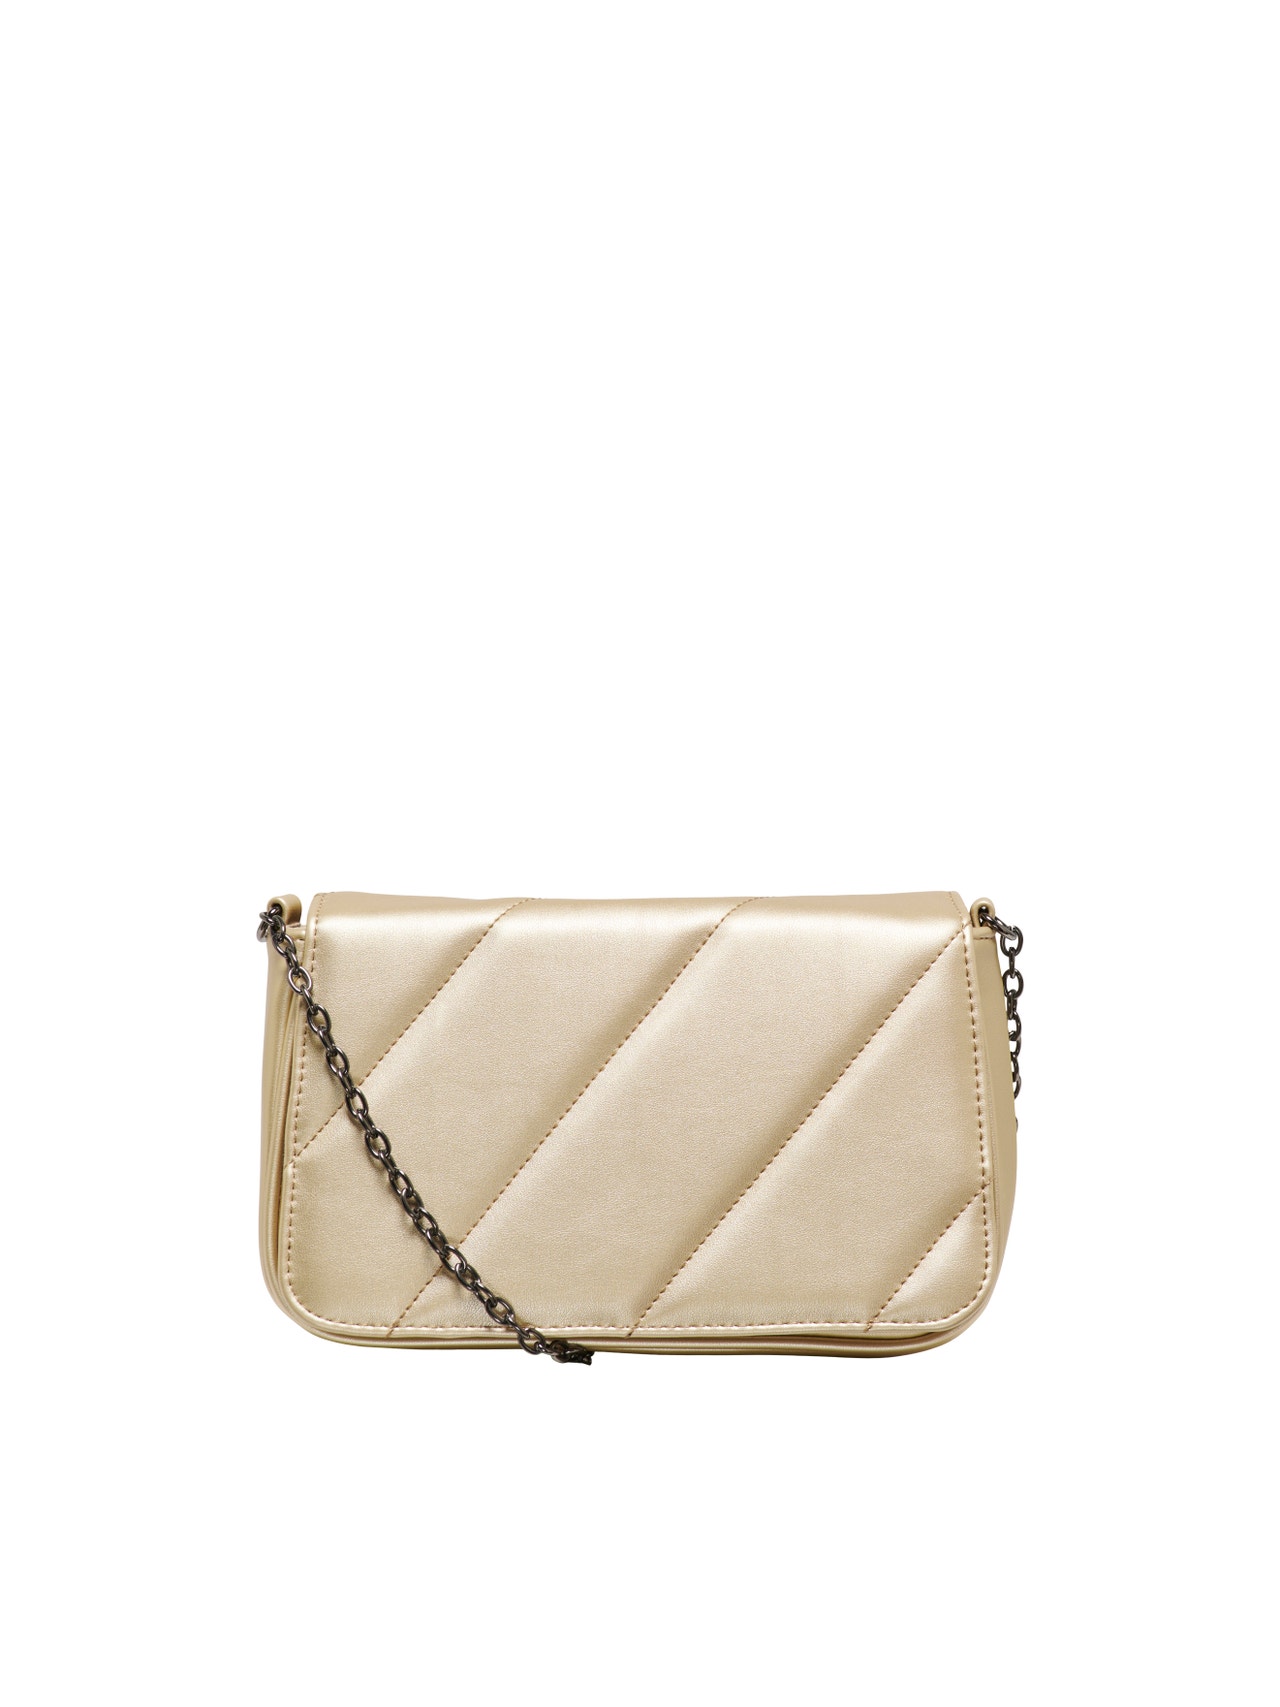 ONLY Bag with chain strap -Gold Colour - 15300843